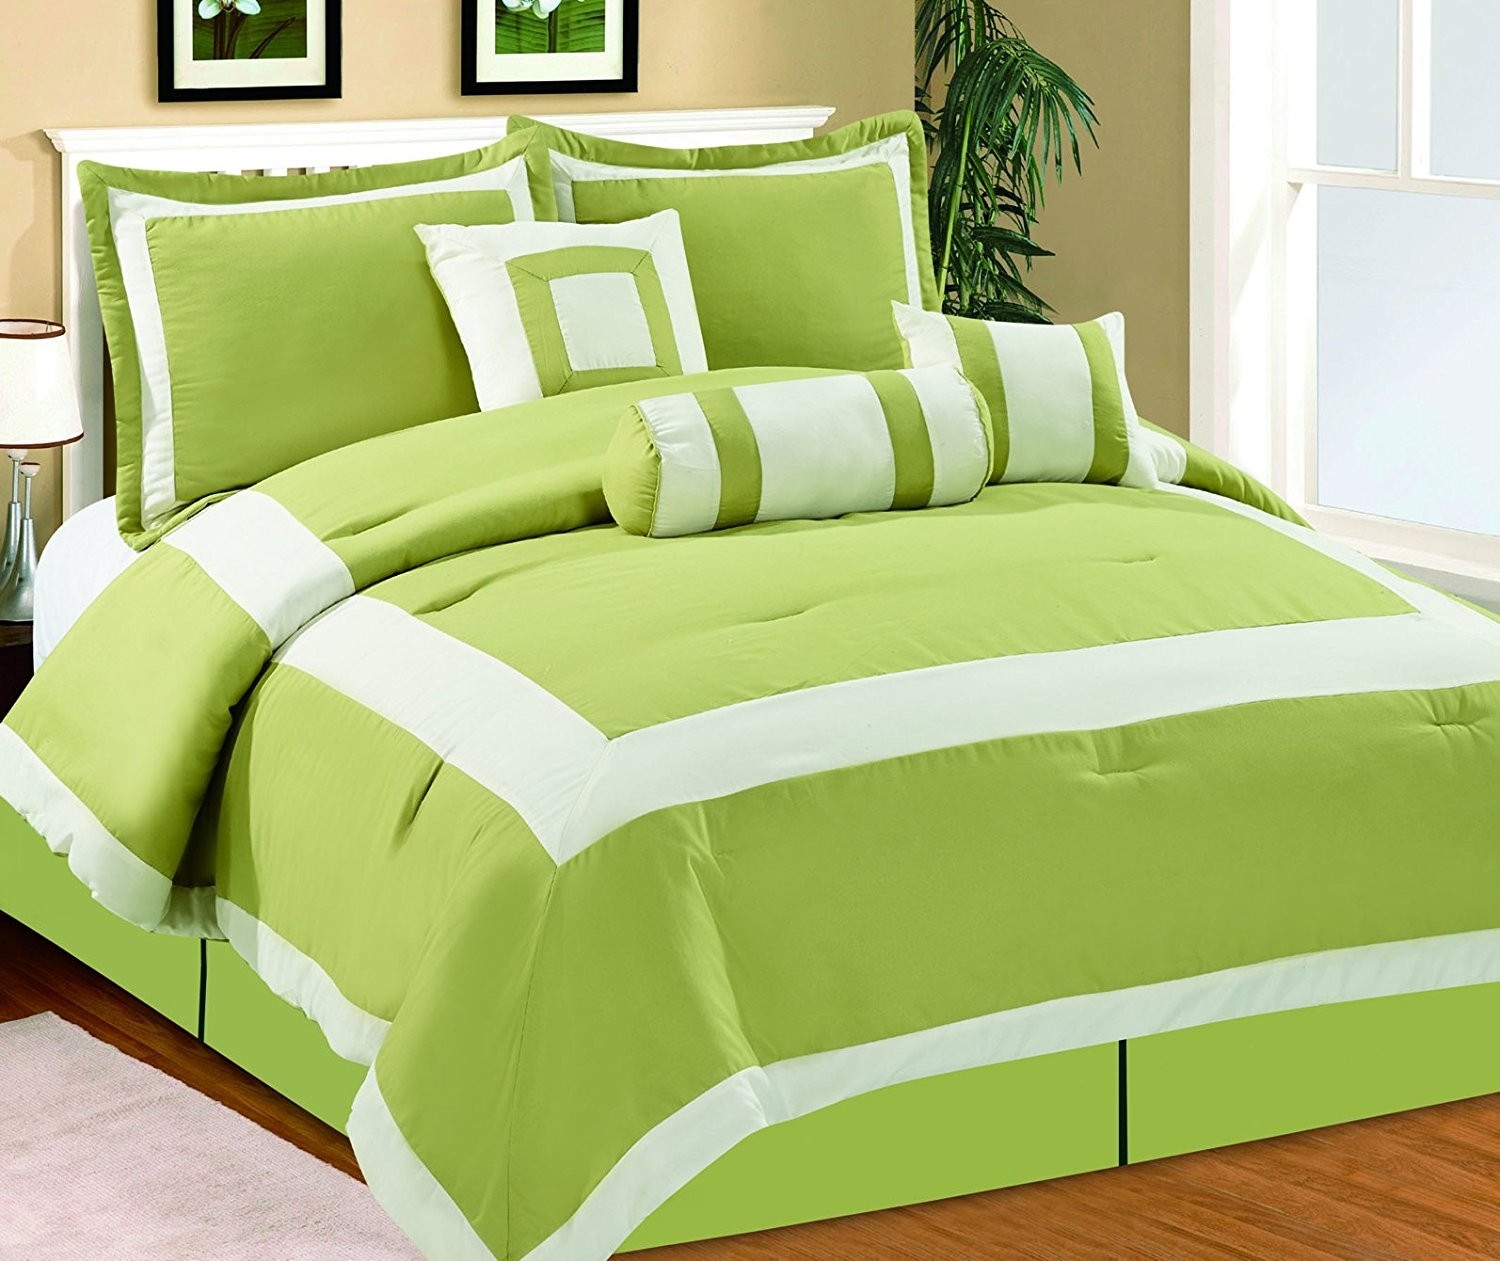 Lime Green Flat Sheets